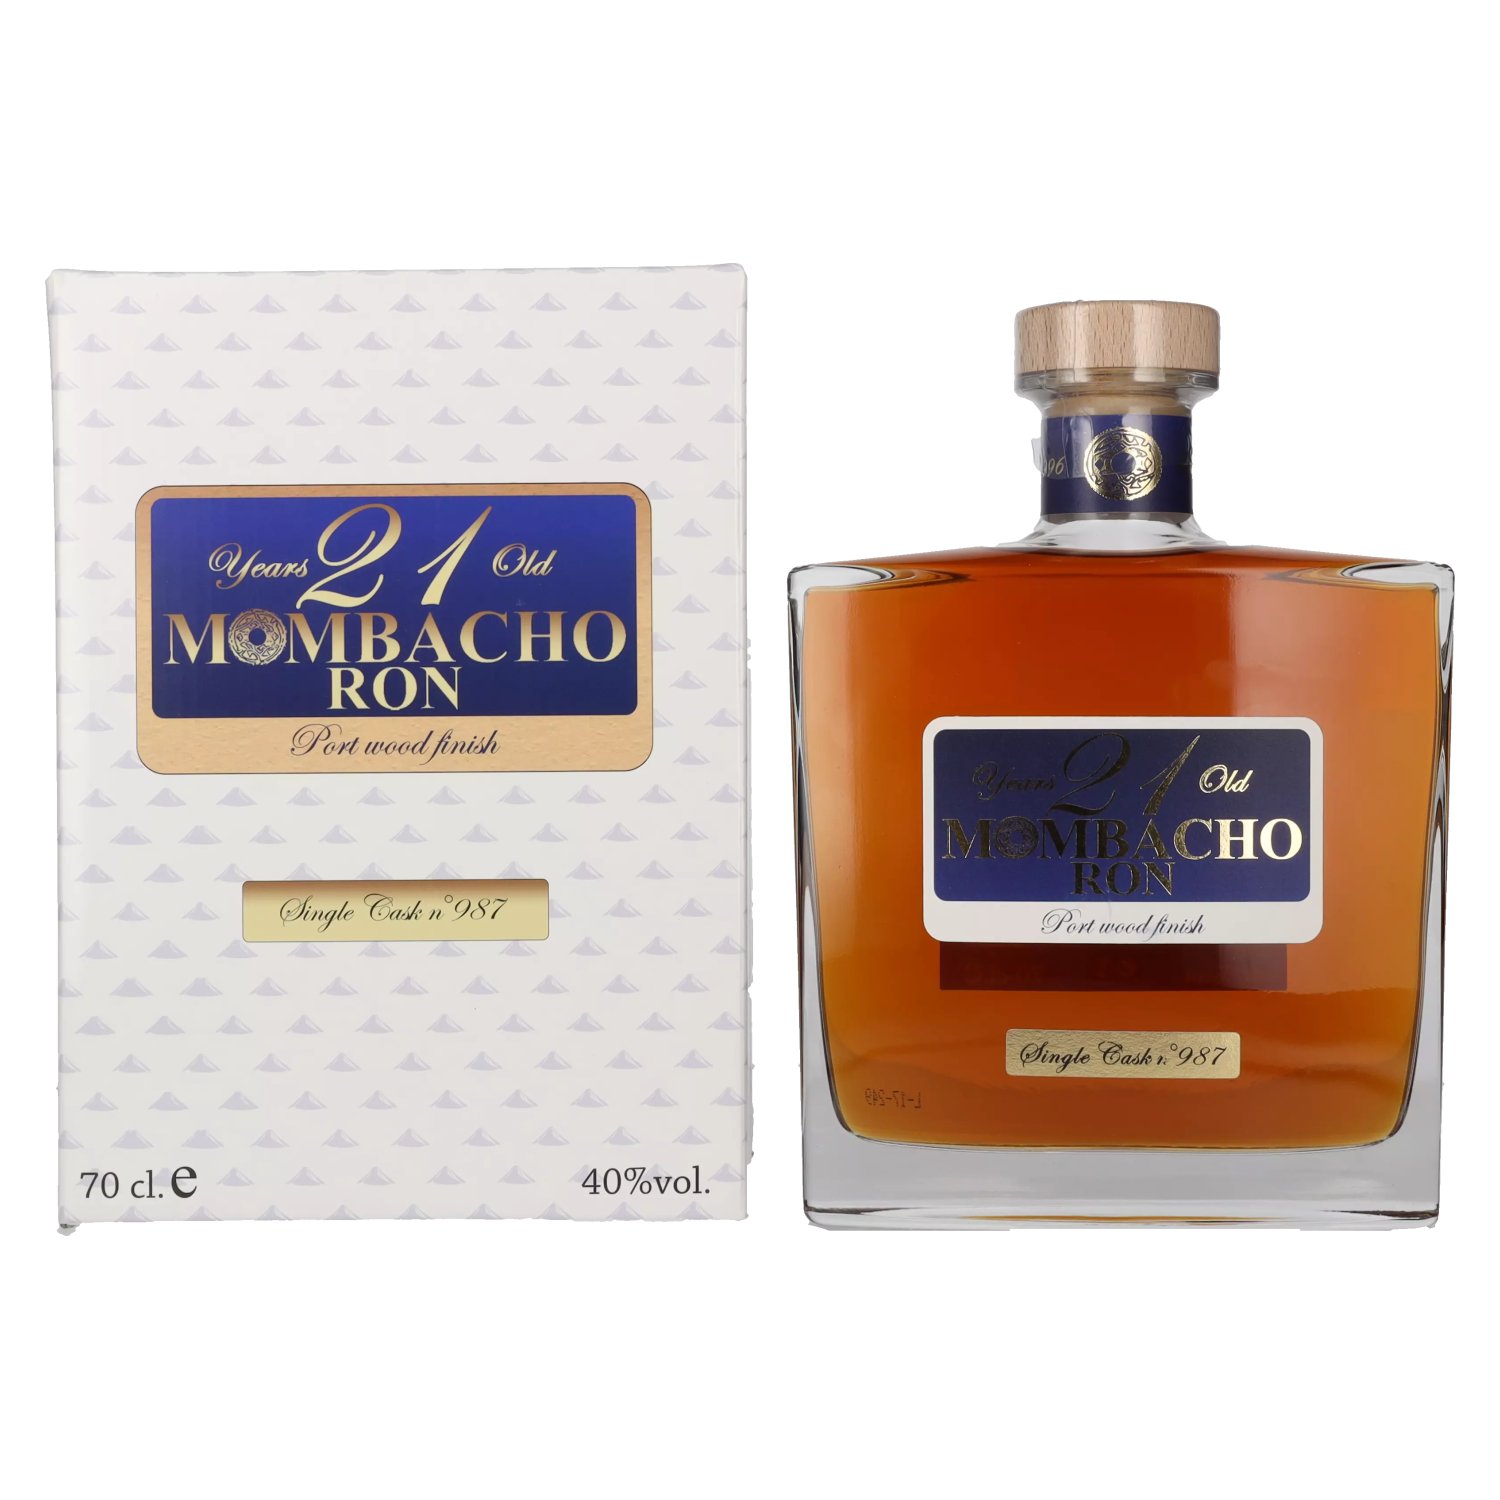 Giftbox Mombacho 40% Port 0,7l in Old Finish Vol. Ron Wood 21 Years